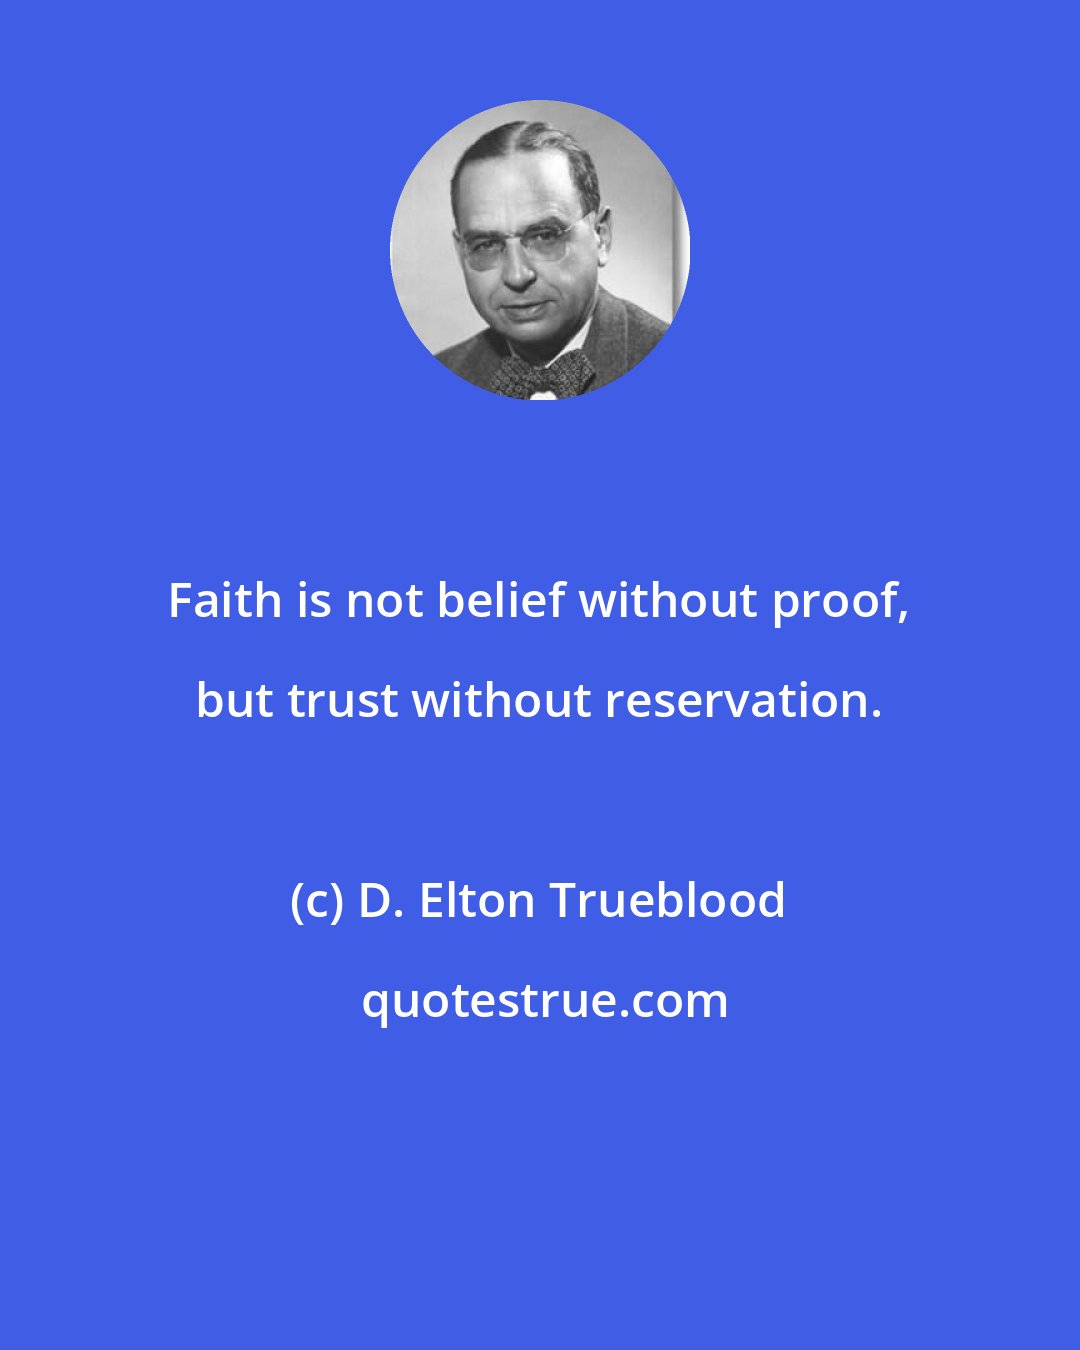 D. Elton Trueblood: Faith is not belief without proof, but trust without reservation.